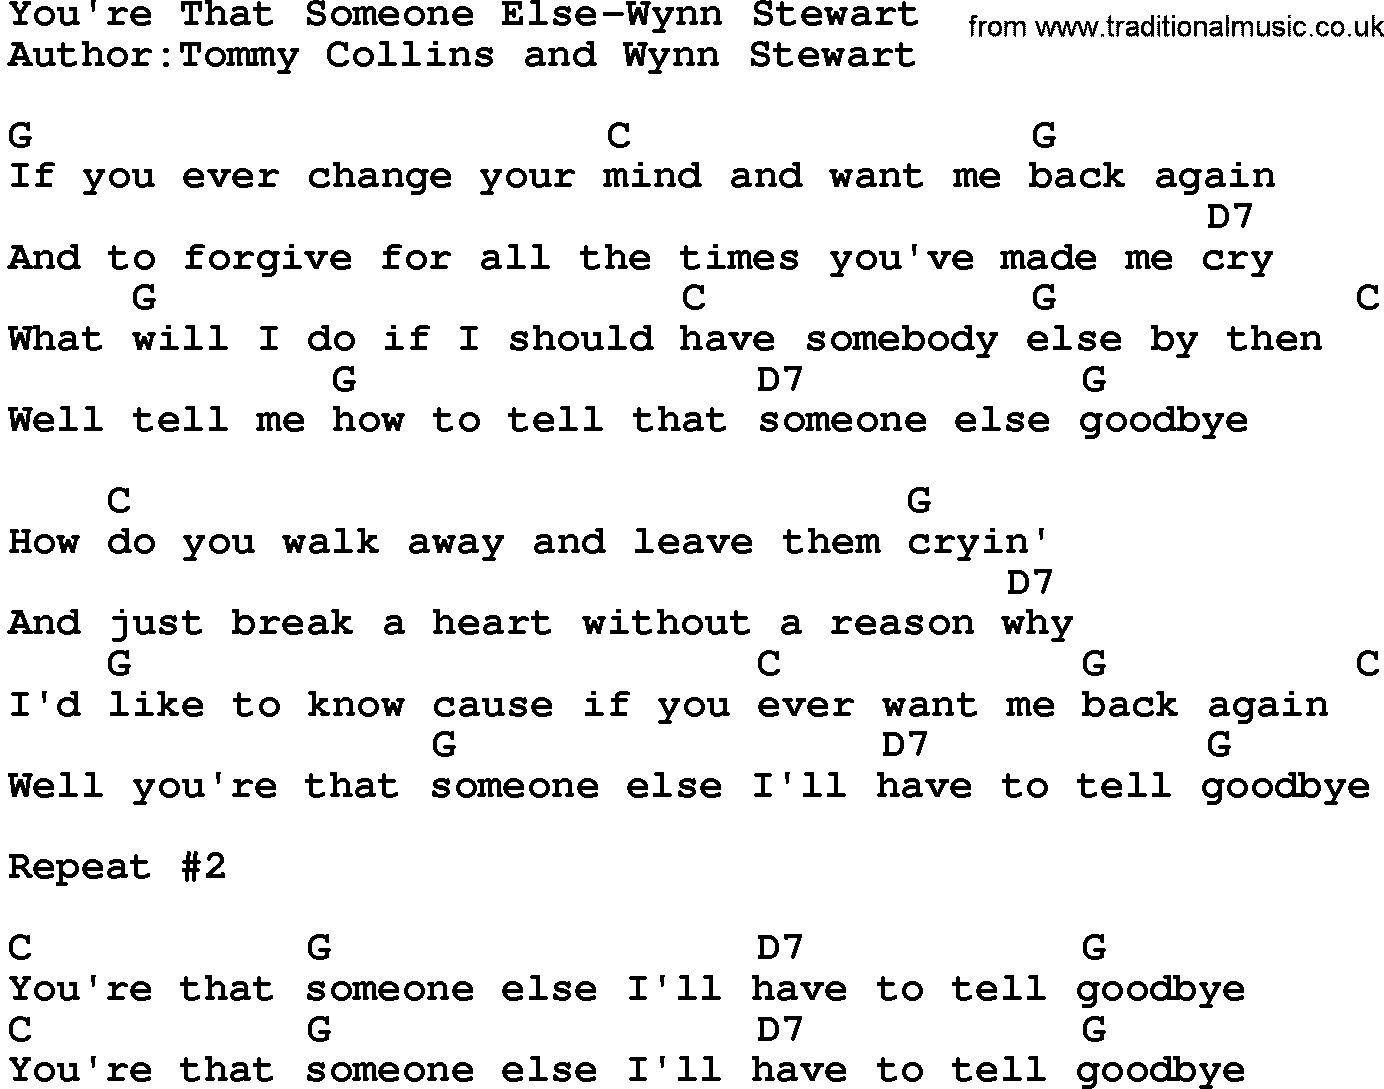 Country music song: You're That Someone Else-Wynn Stewart lyrics and chords